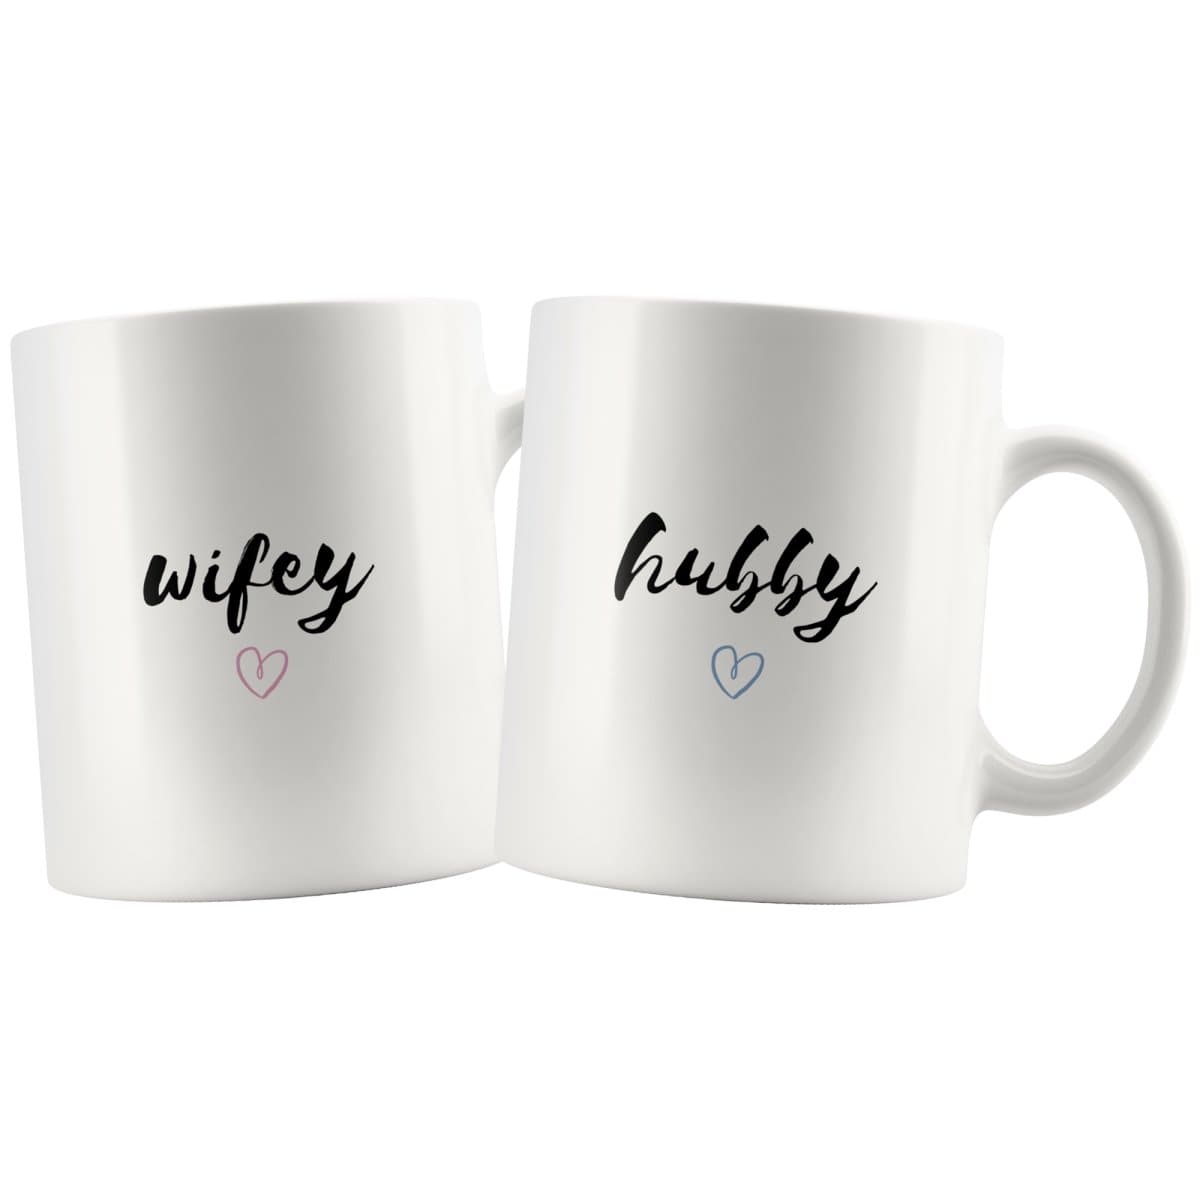 Wifey And Hubby Matching Couple Mugs Reviews On Judgeme